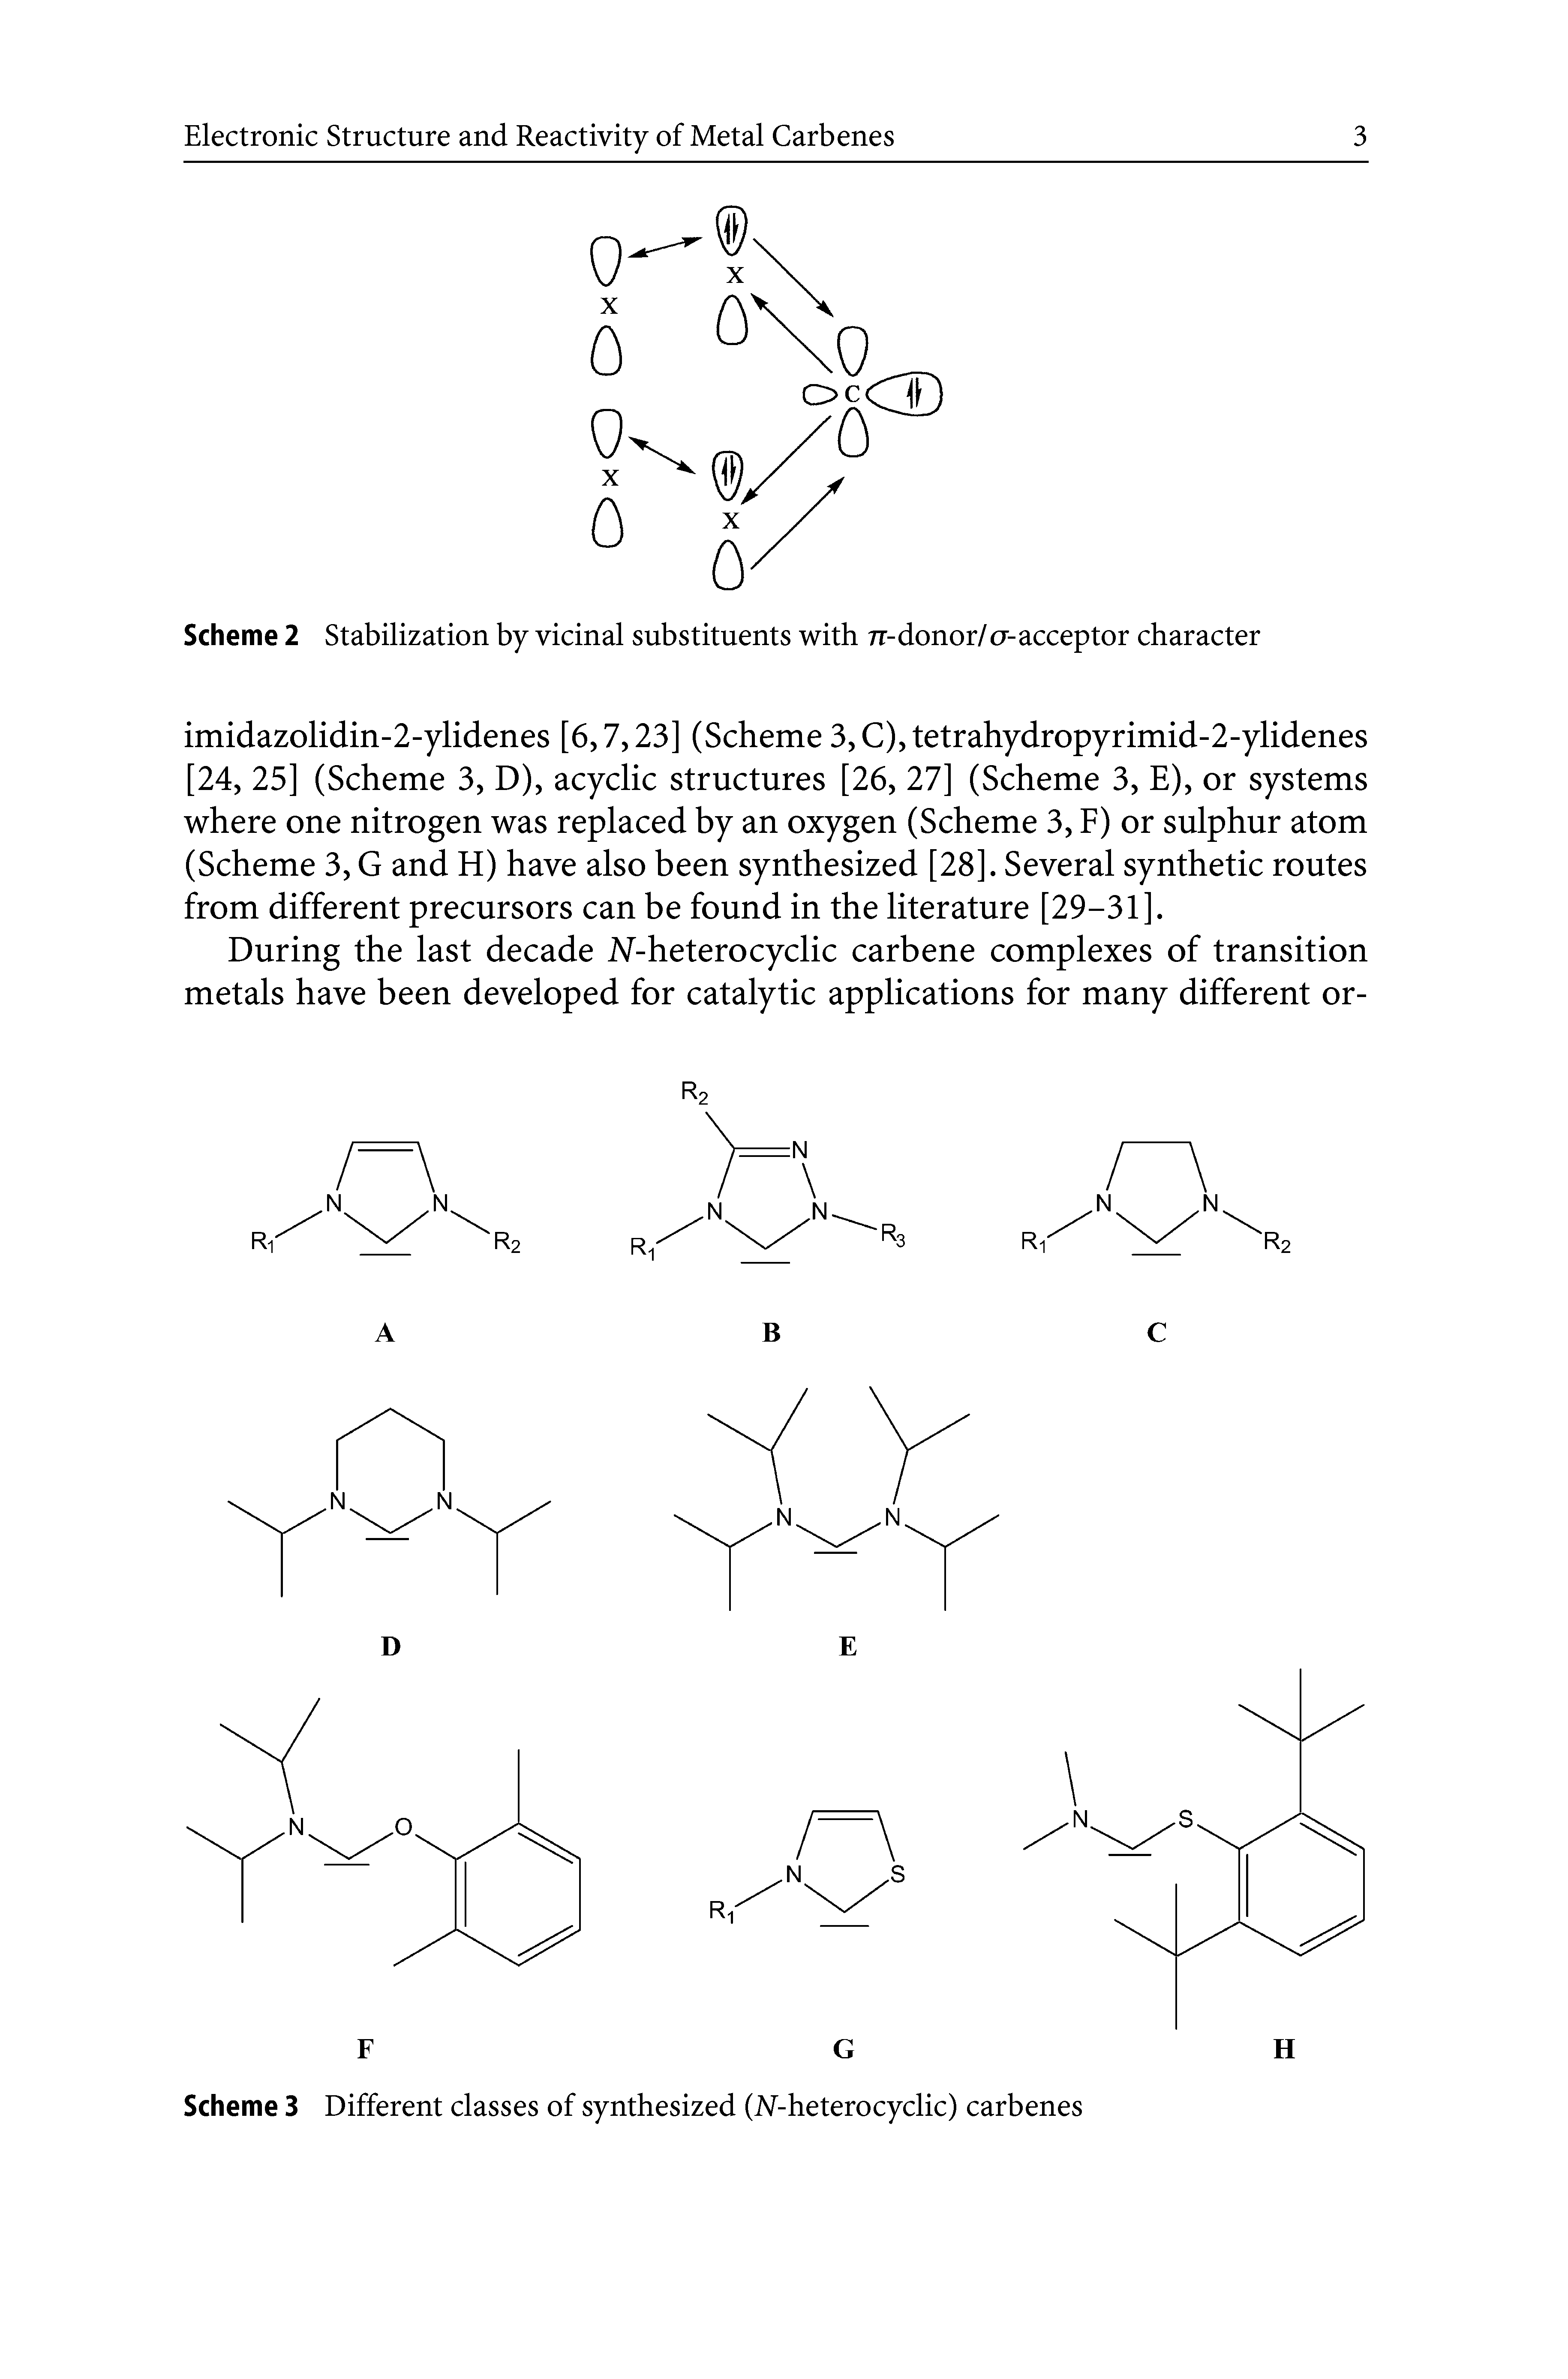 Scheme 3 Different classes of synthesized (AT-heterocyclic) carbenes...